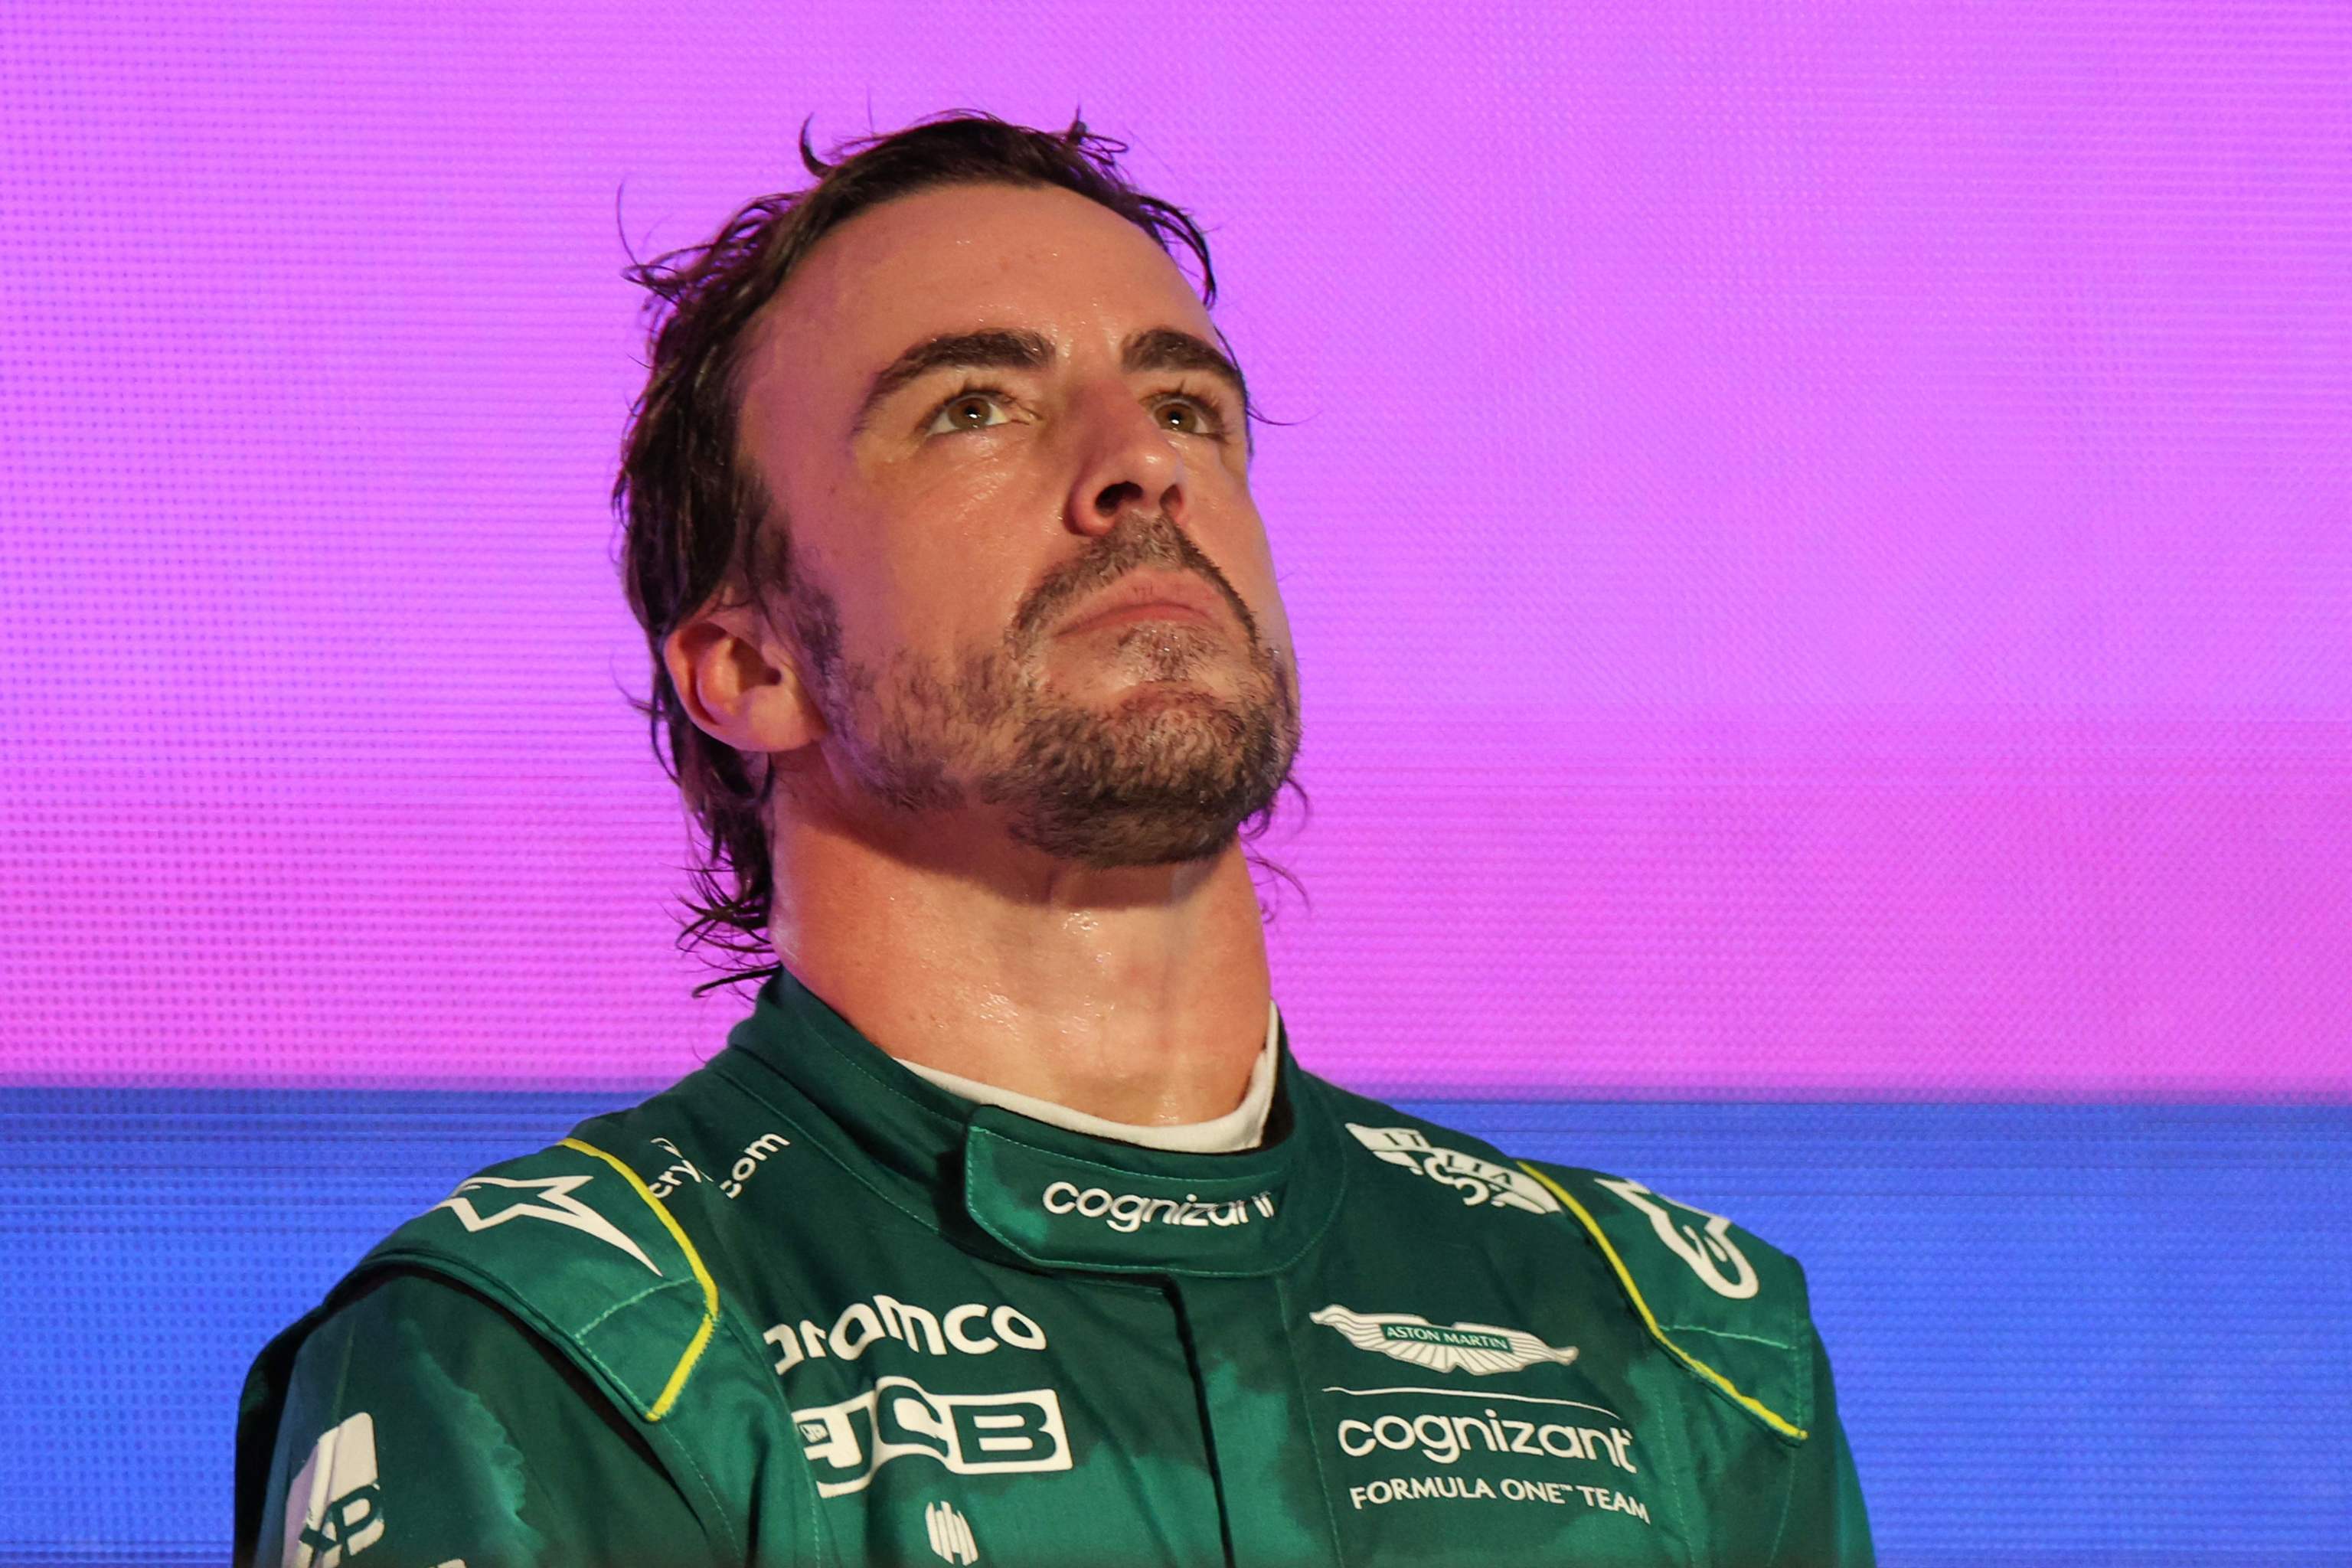 Aston Martin's Spanish driver Fernando  lt;HIT gt;Alonso lt;/HIT gt; reacts on the podium at the end of the Saudi Arabia Formula One Grand Prix at the Jeddah Corniche Circuit in Jeddah on March 19, 2023. (Photo by Giuseppe CACACE / AFP)